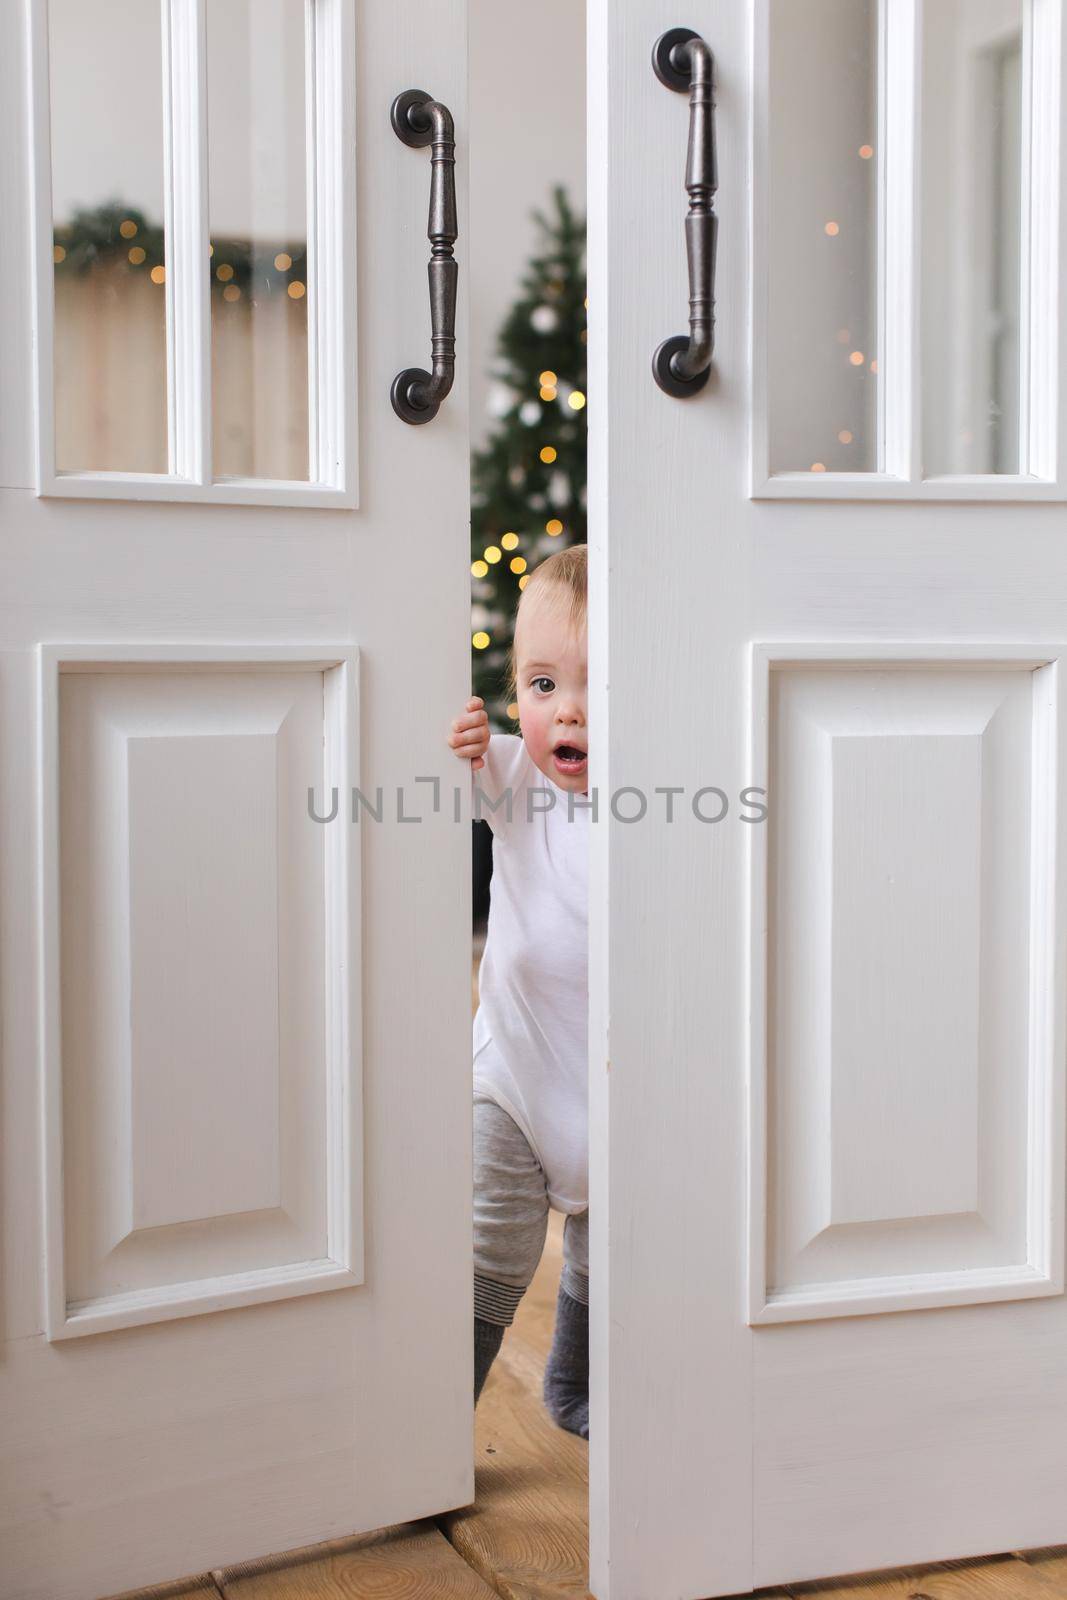 Adorable infant standing in doors looking at camera opens the door and is surprised on background of Christmas tree